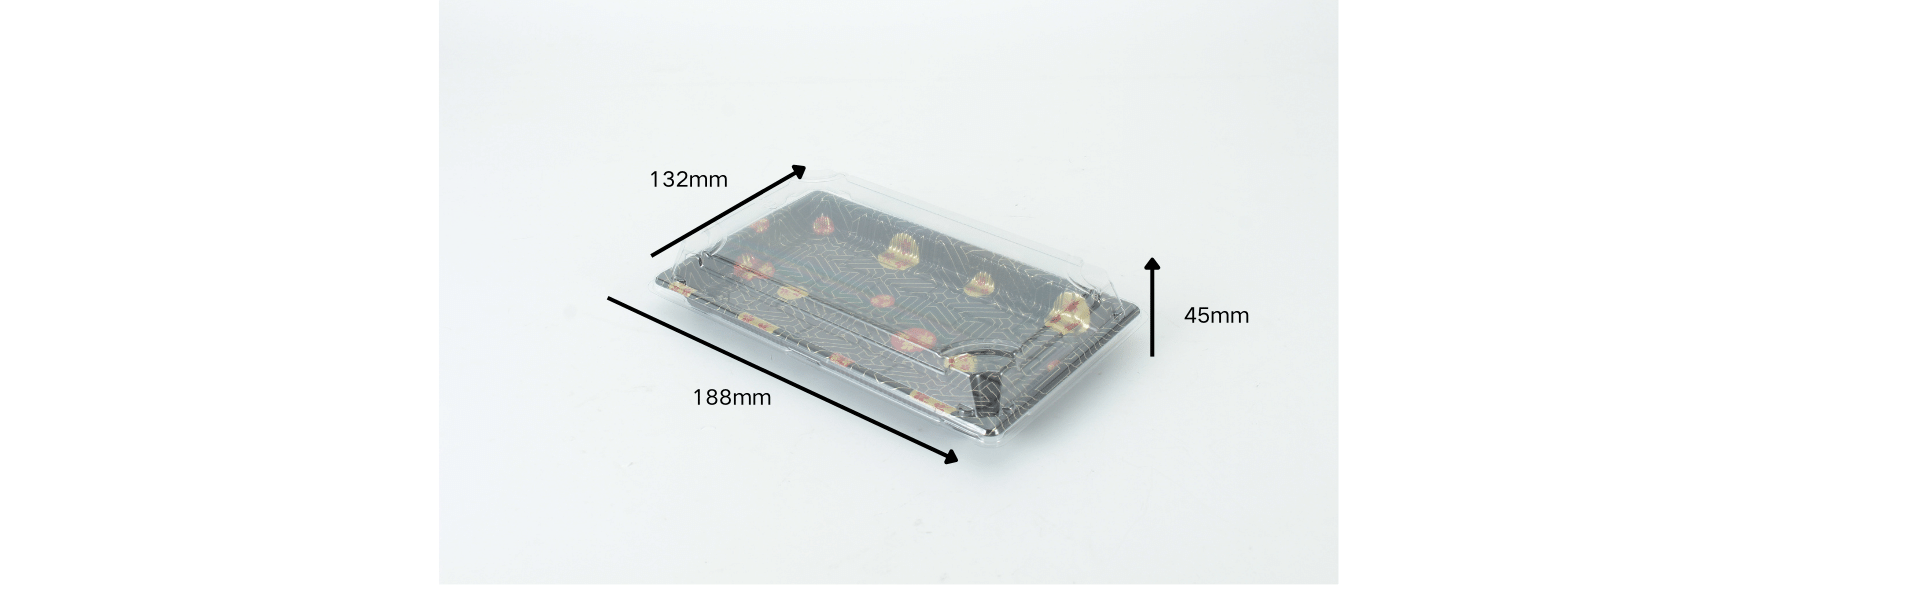 wl-10 disposable to go sushi box with size parameters around the product